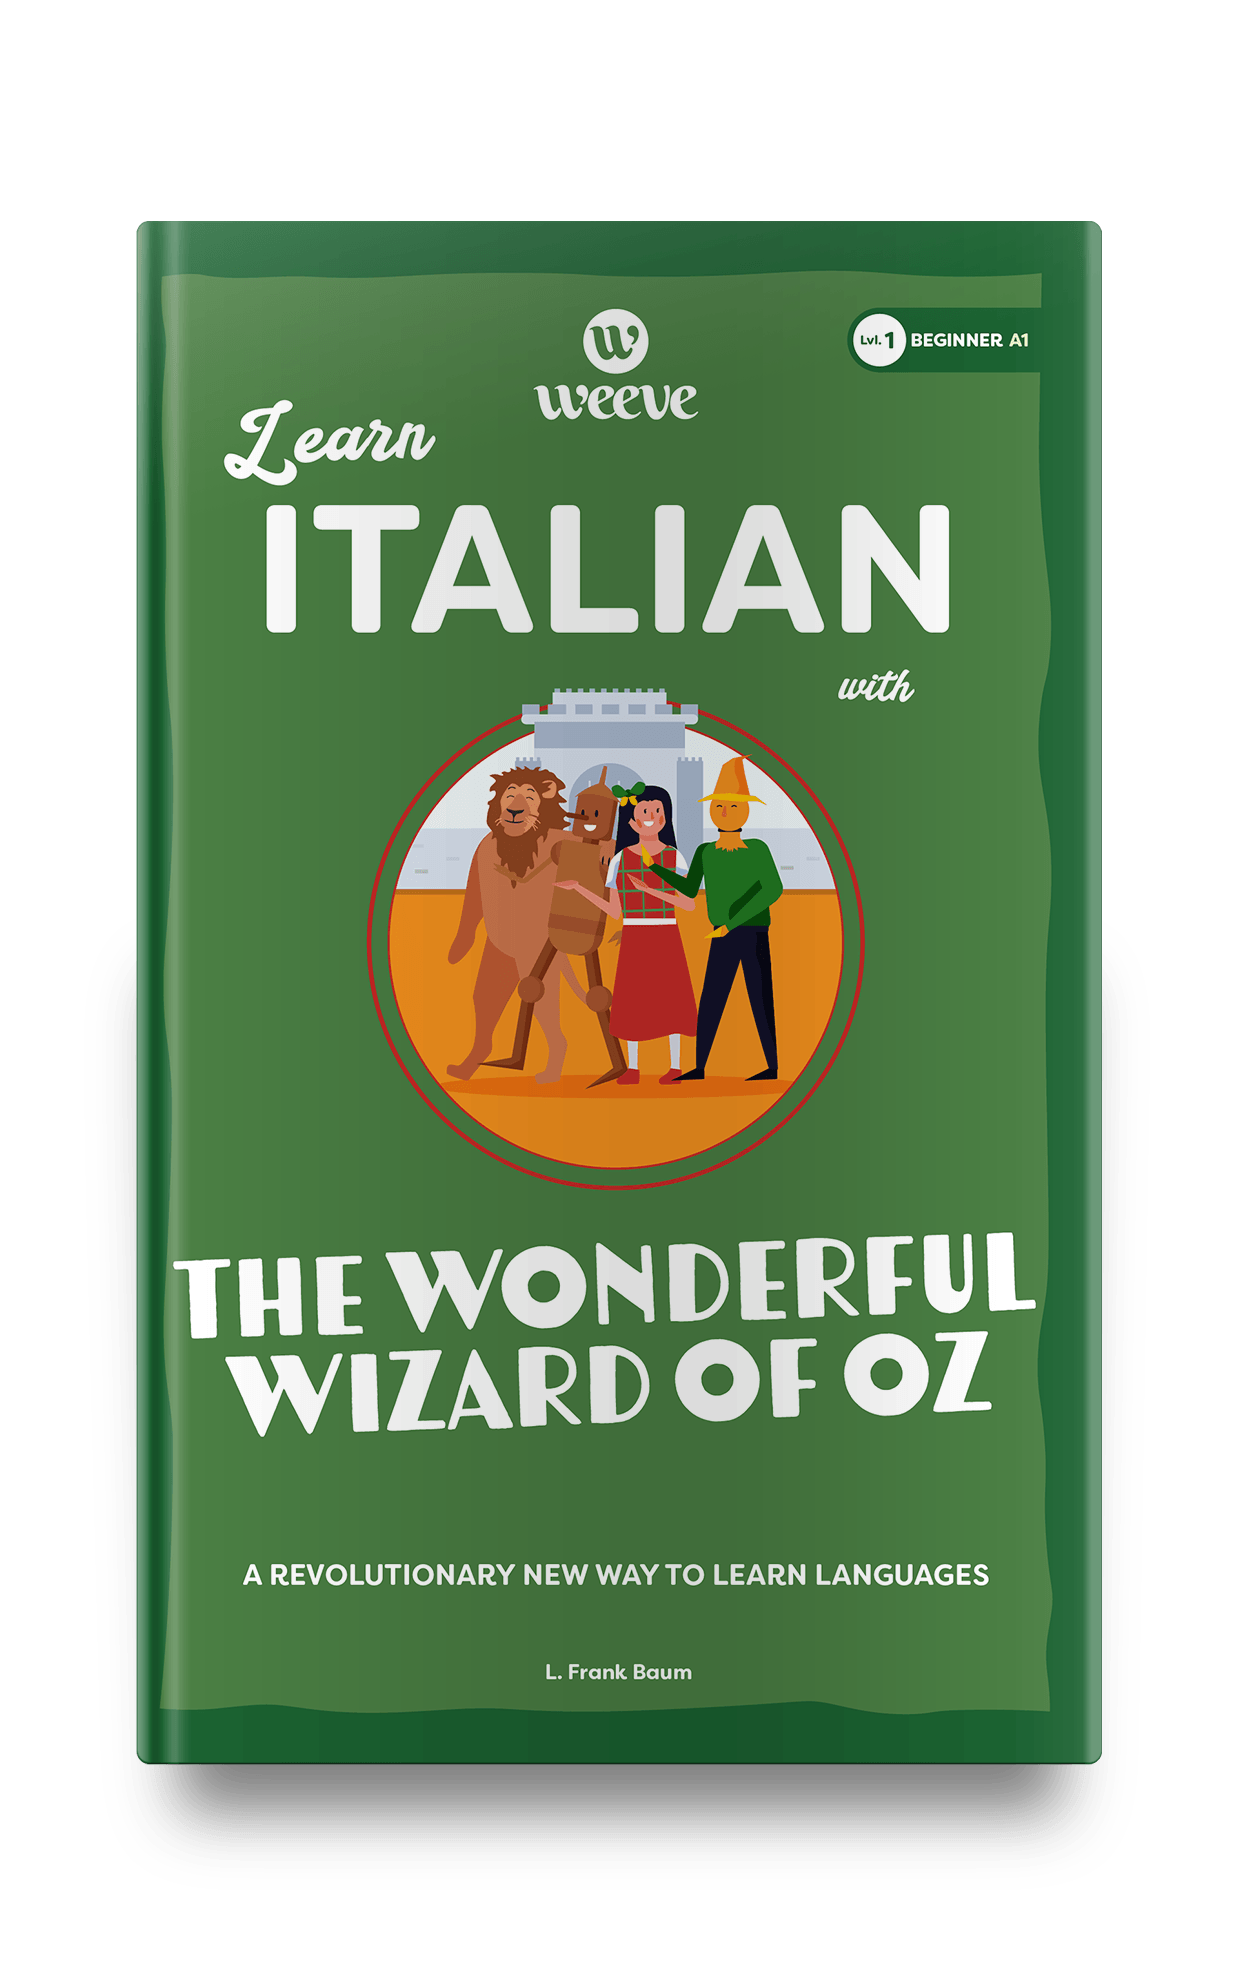 Learn Italian with the Wonderful Wizard Of Oz - Weeve